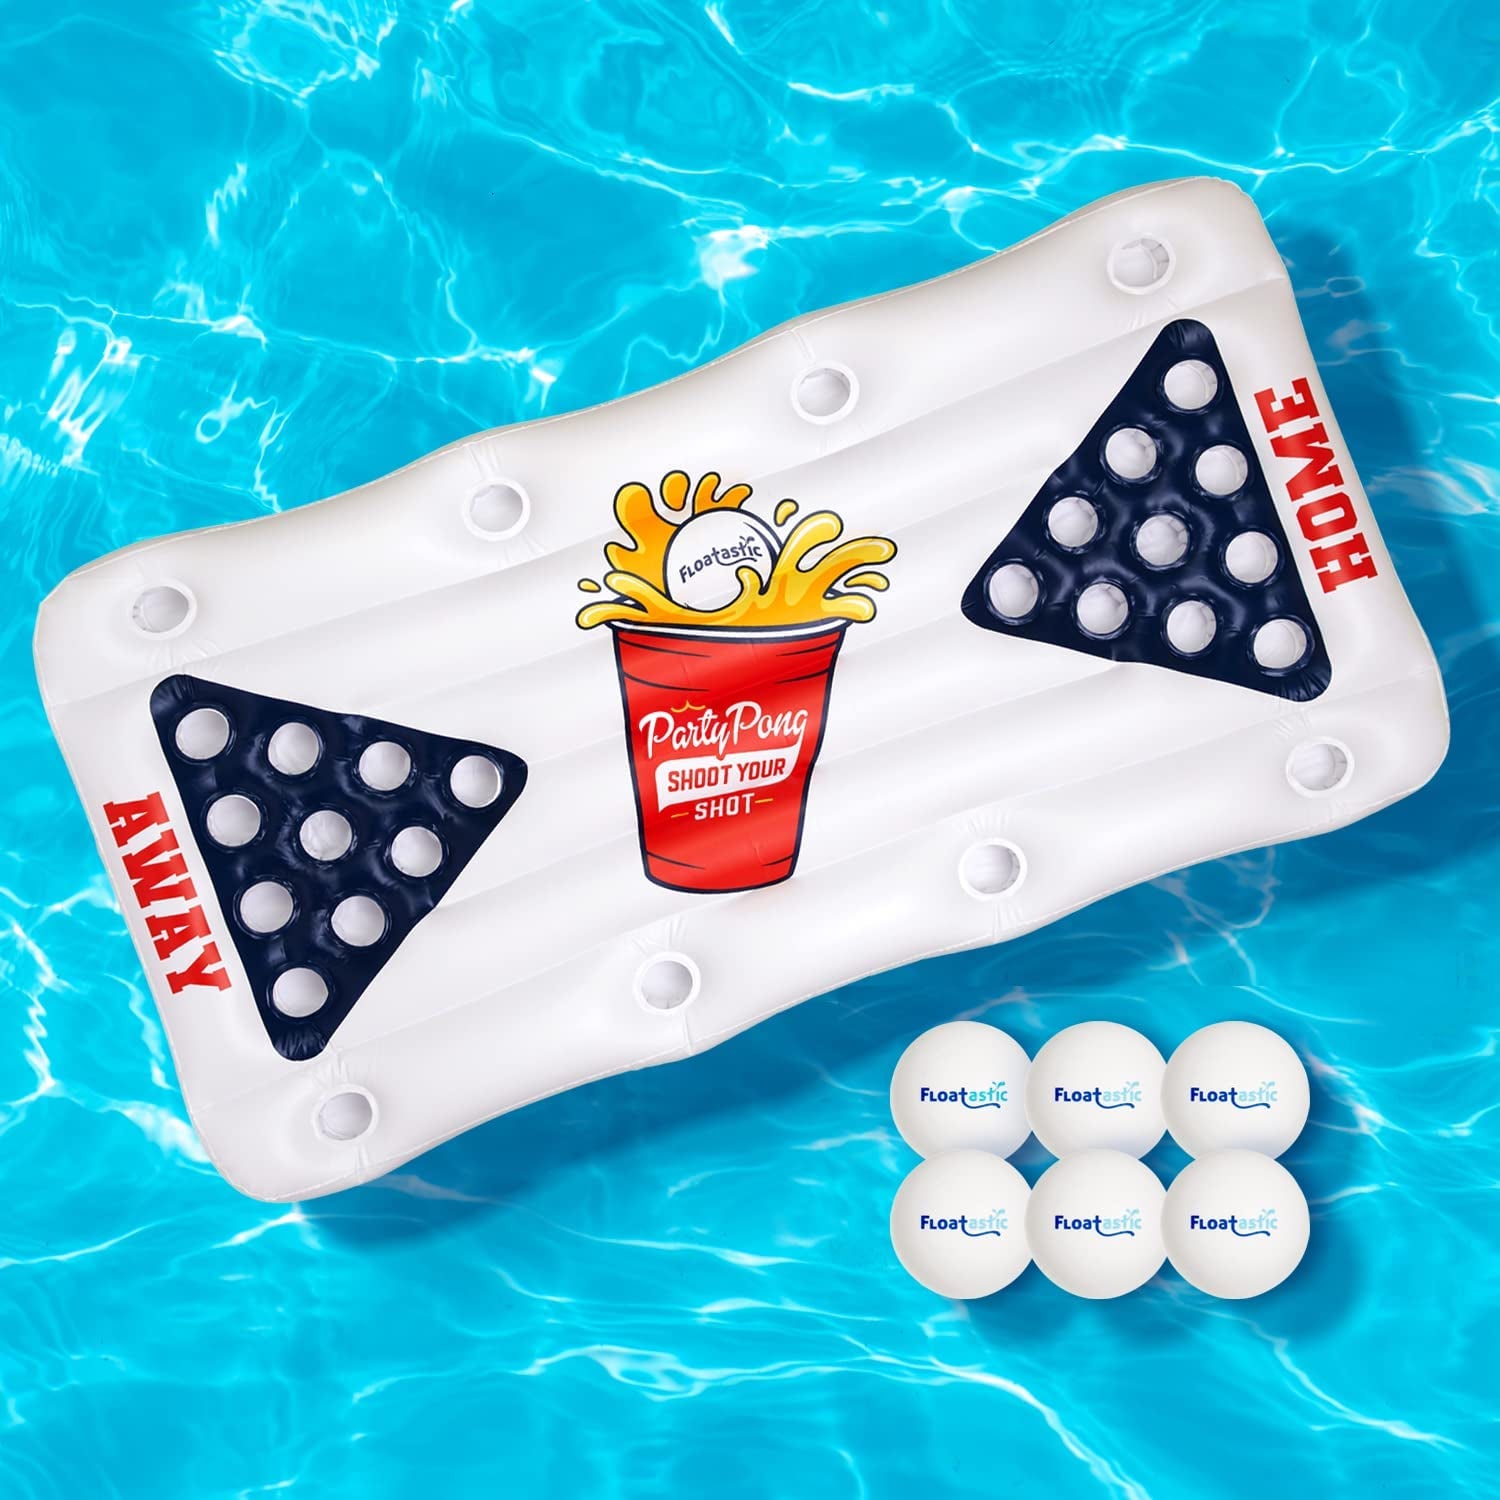 Floatastic, Floatastic Inflatable Beer Pong Pool Float - Pool Beer Pong Float, Pool Pong, Floating Beer Pong - Pool Floats Adult Size, Pool Toys for Adults, Pool Games for Adults, Pool Accessories for Adults